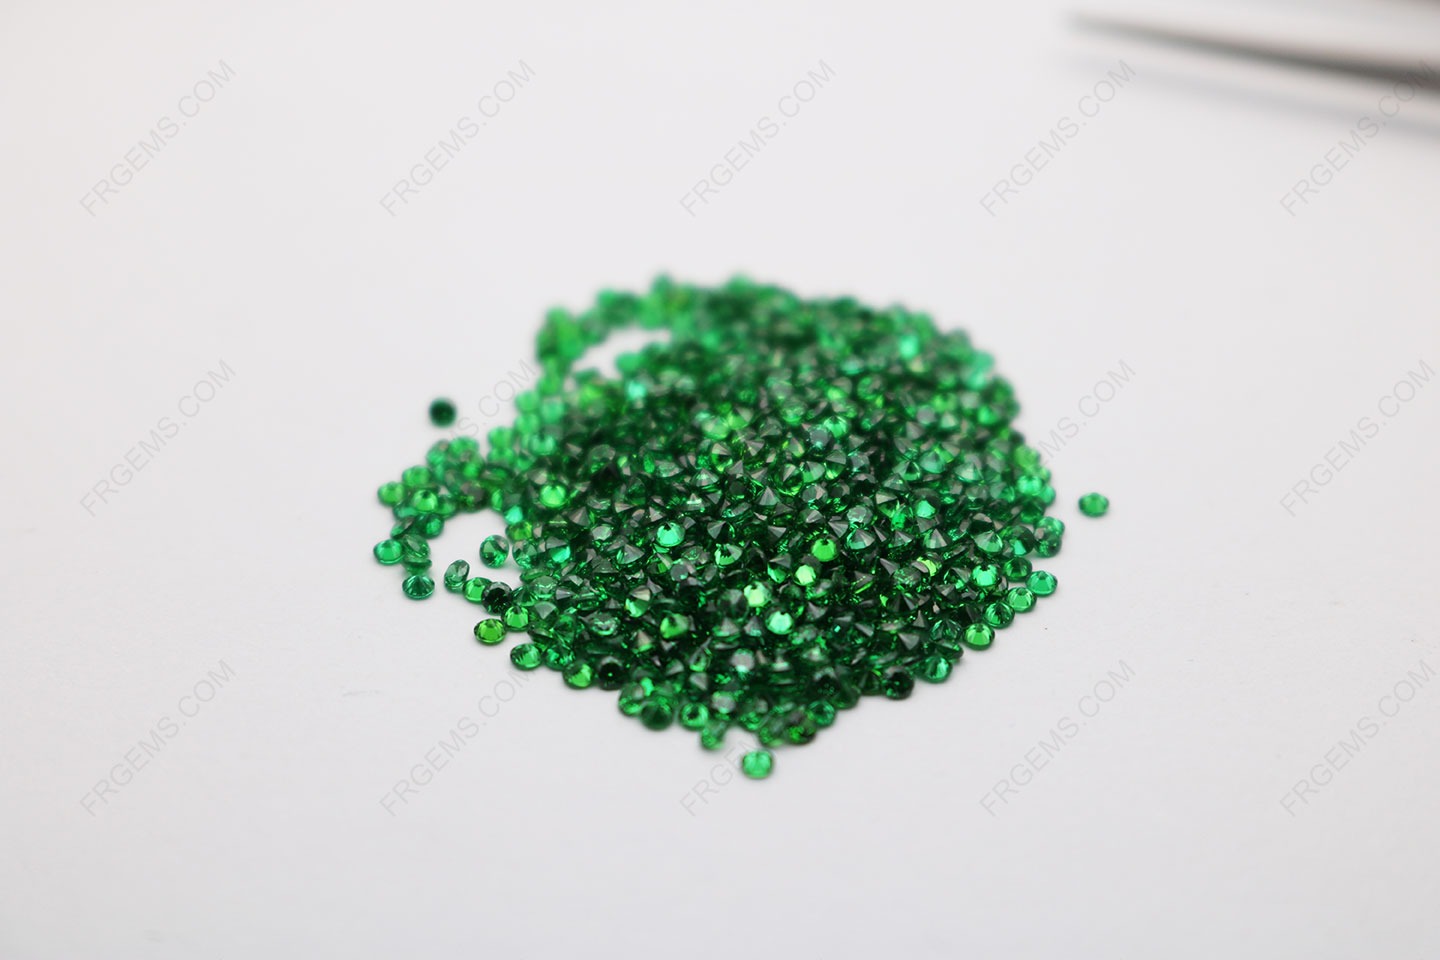 Cubic_Zirconia_Green_Round_diamond_Faceted_Cut_1.75mm_Melee_stones_China_IMG_2944